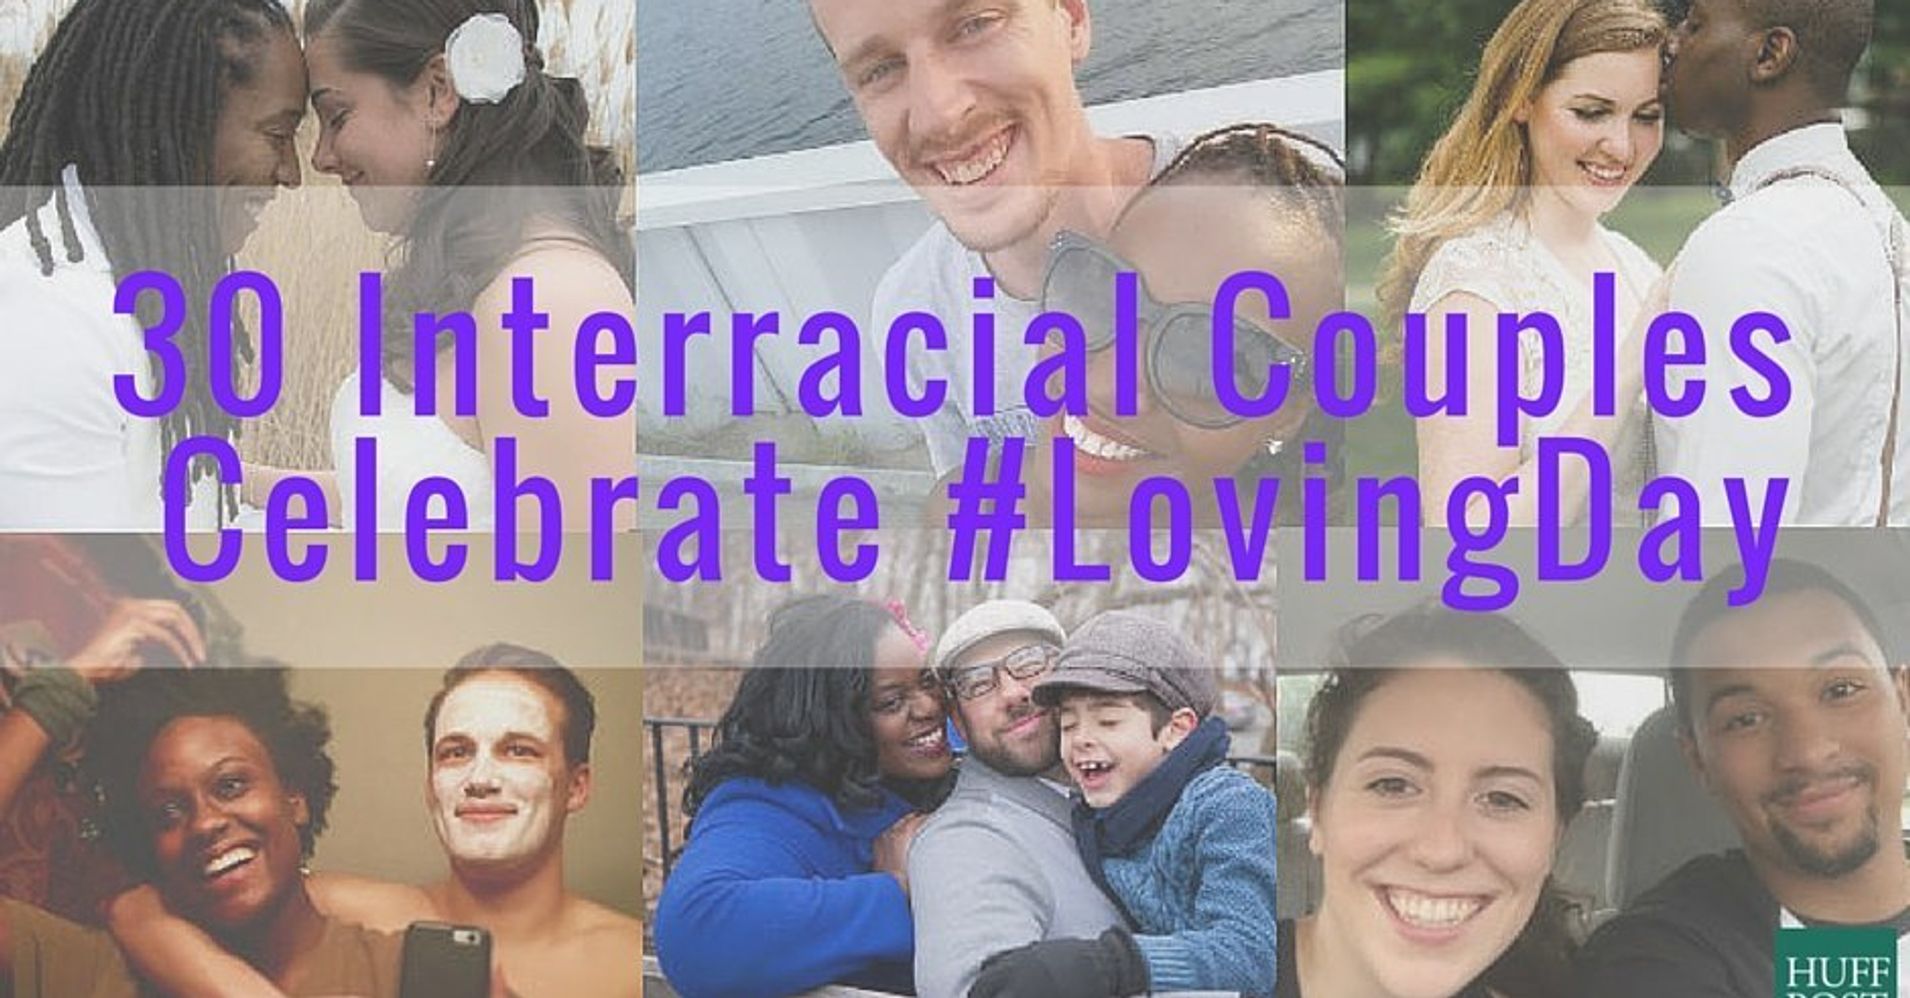 30 Interracial Couples Show Why Their Love Matters Huffpost 